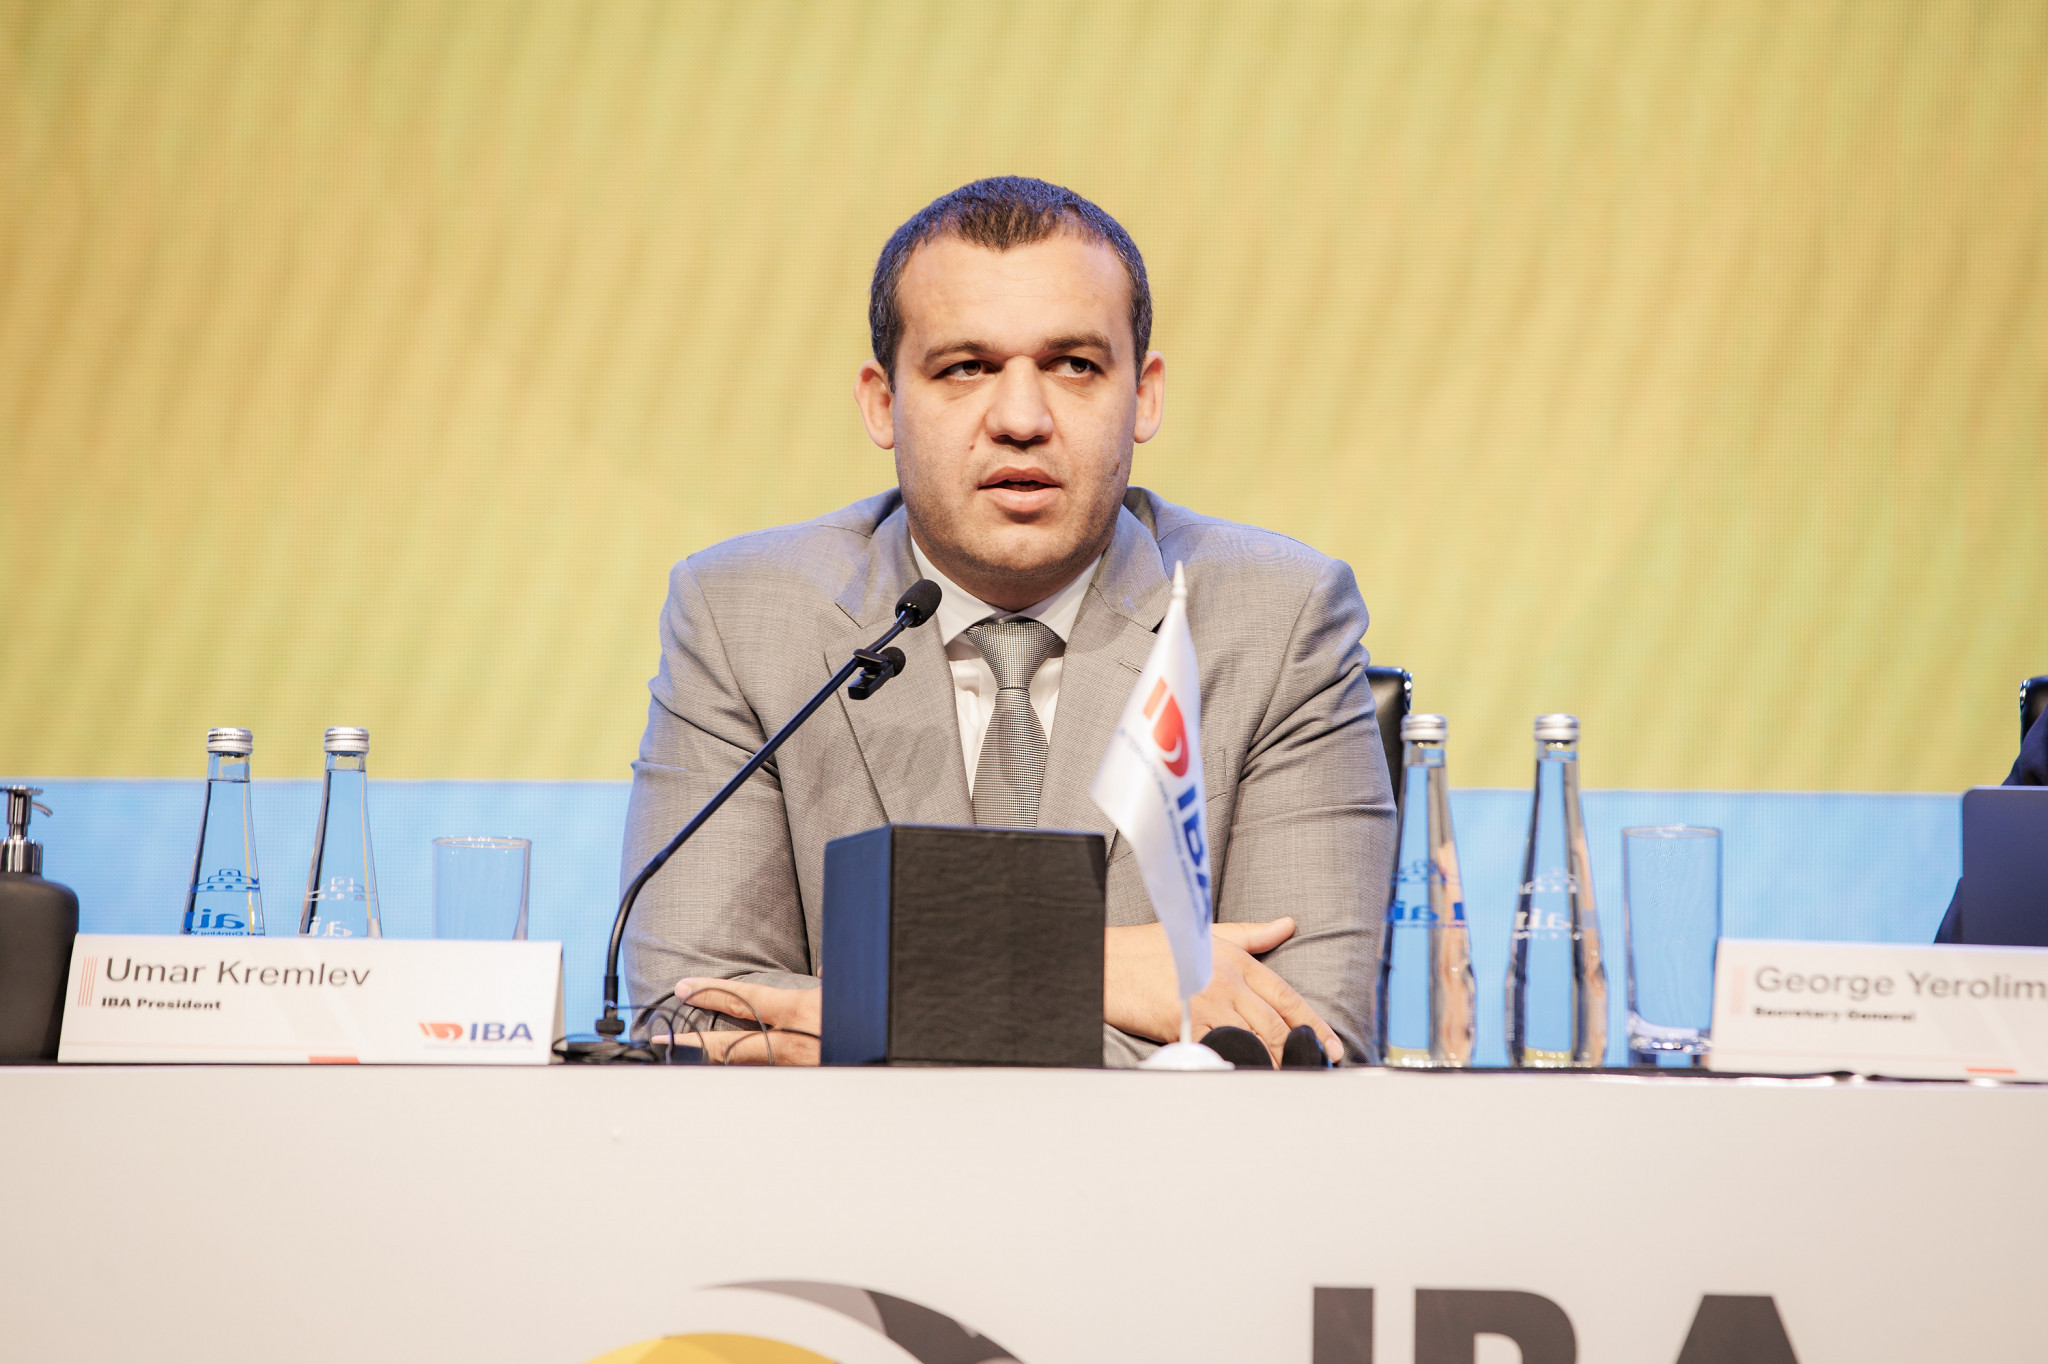 Umar Kremlev confirmed that the IBA is set to renew its sponsorship deal with Gazprom ©IBA